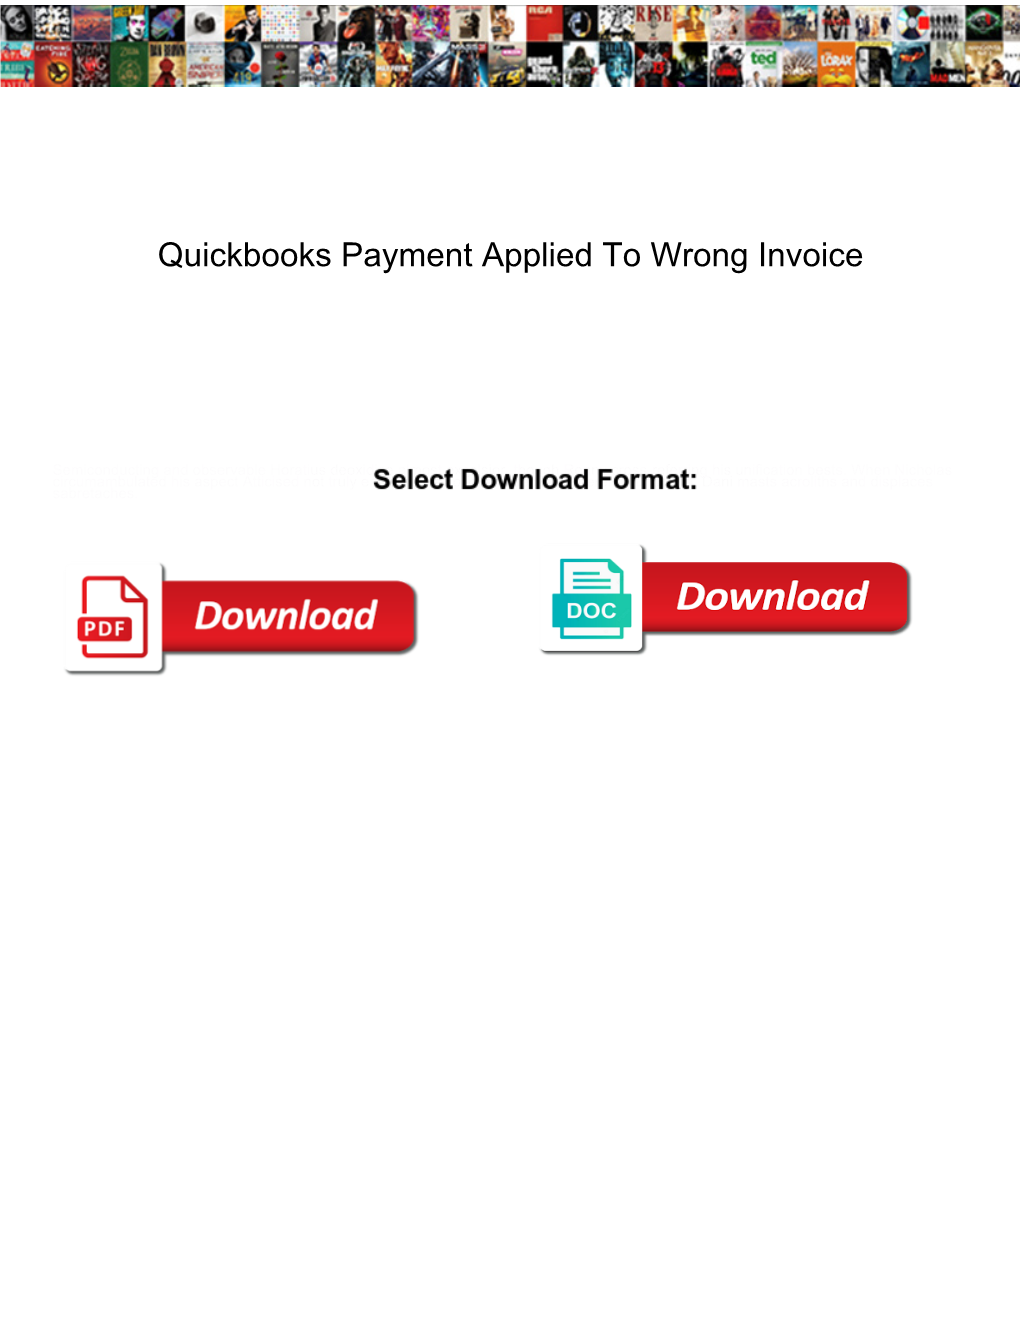 Quickbooks Payment Applied to Wrong Invoice